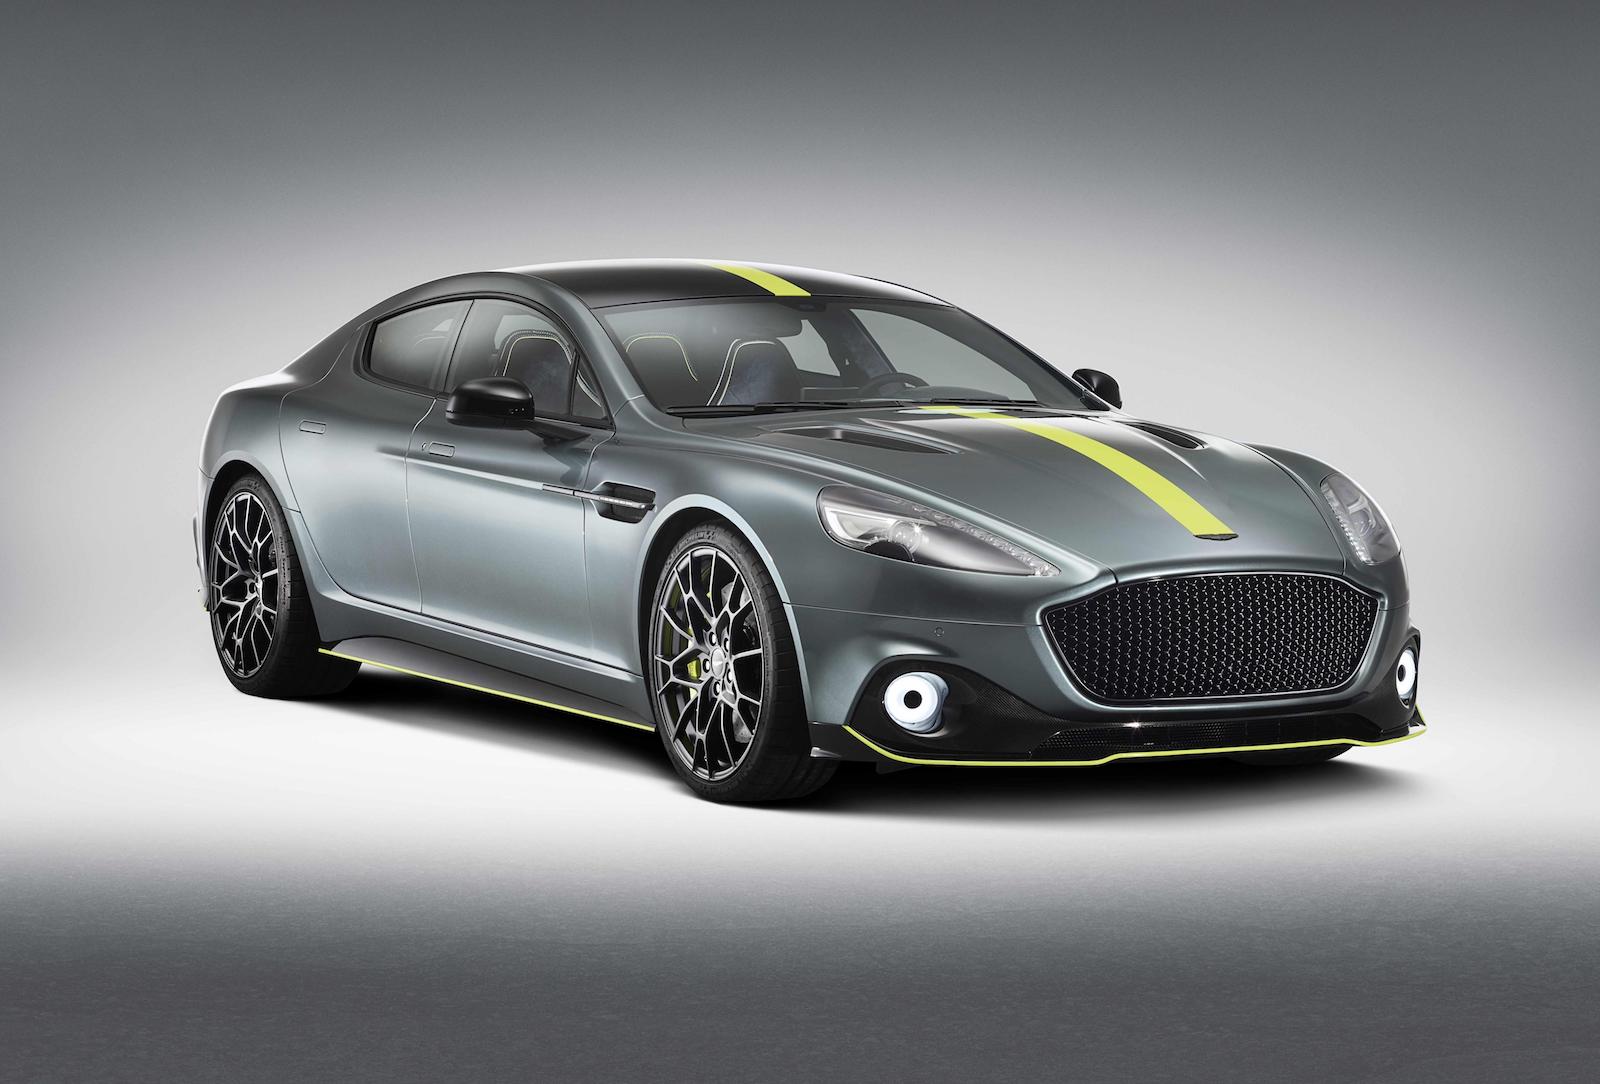 Aston Martin Rapide AMR debuts, inspired by motorsport